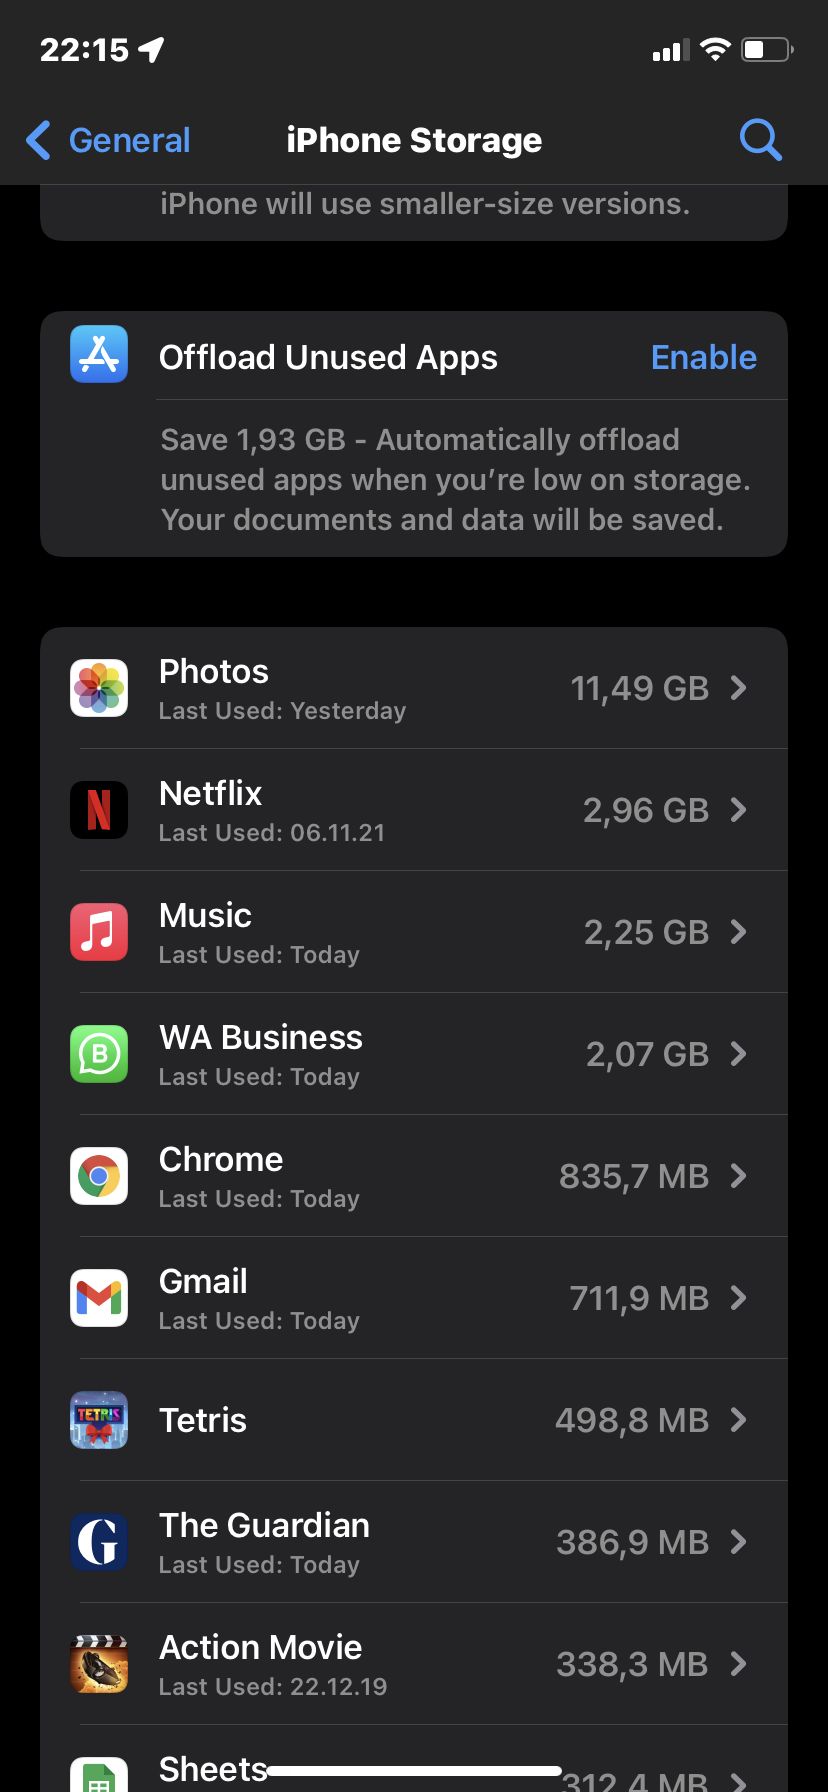 List of apps in the iPhone storage menu.